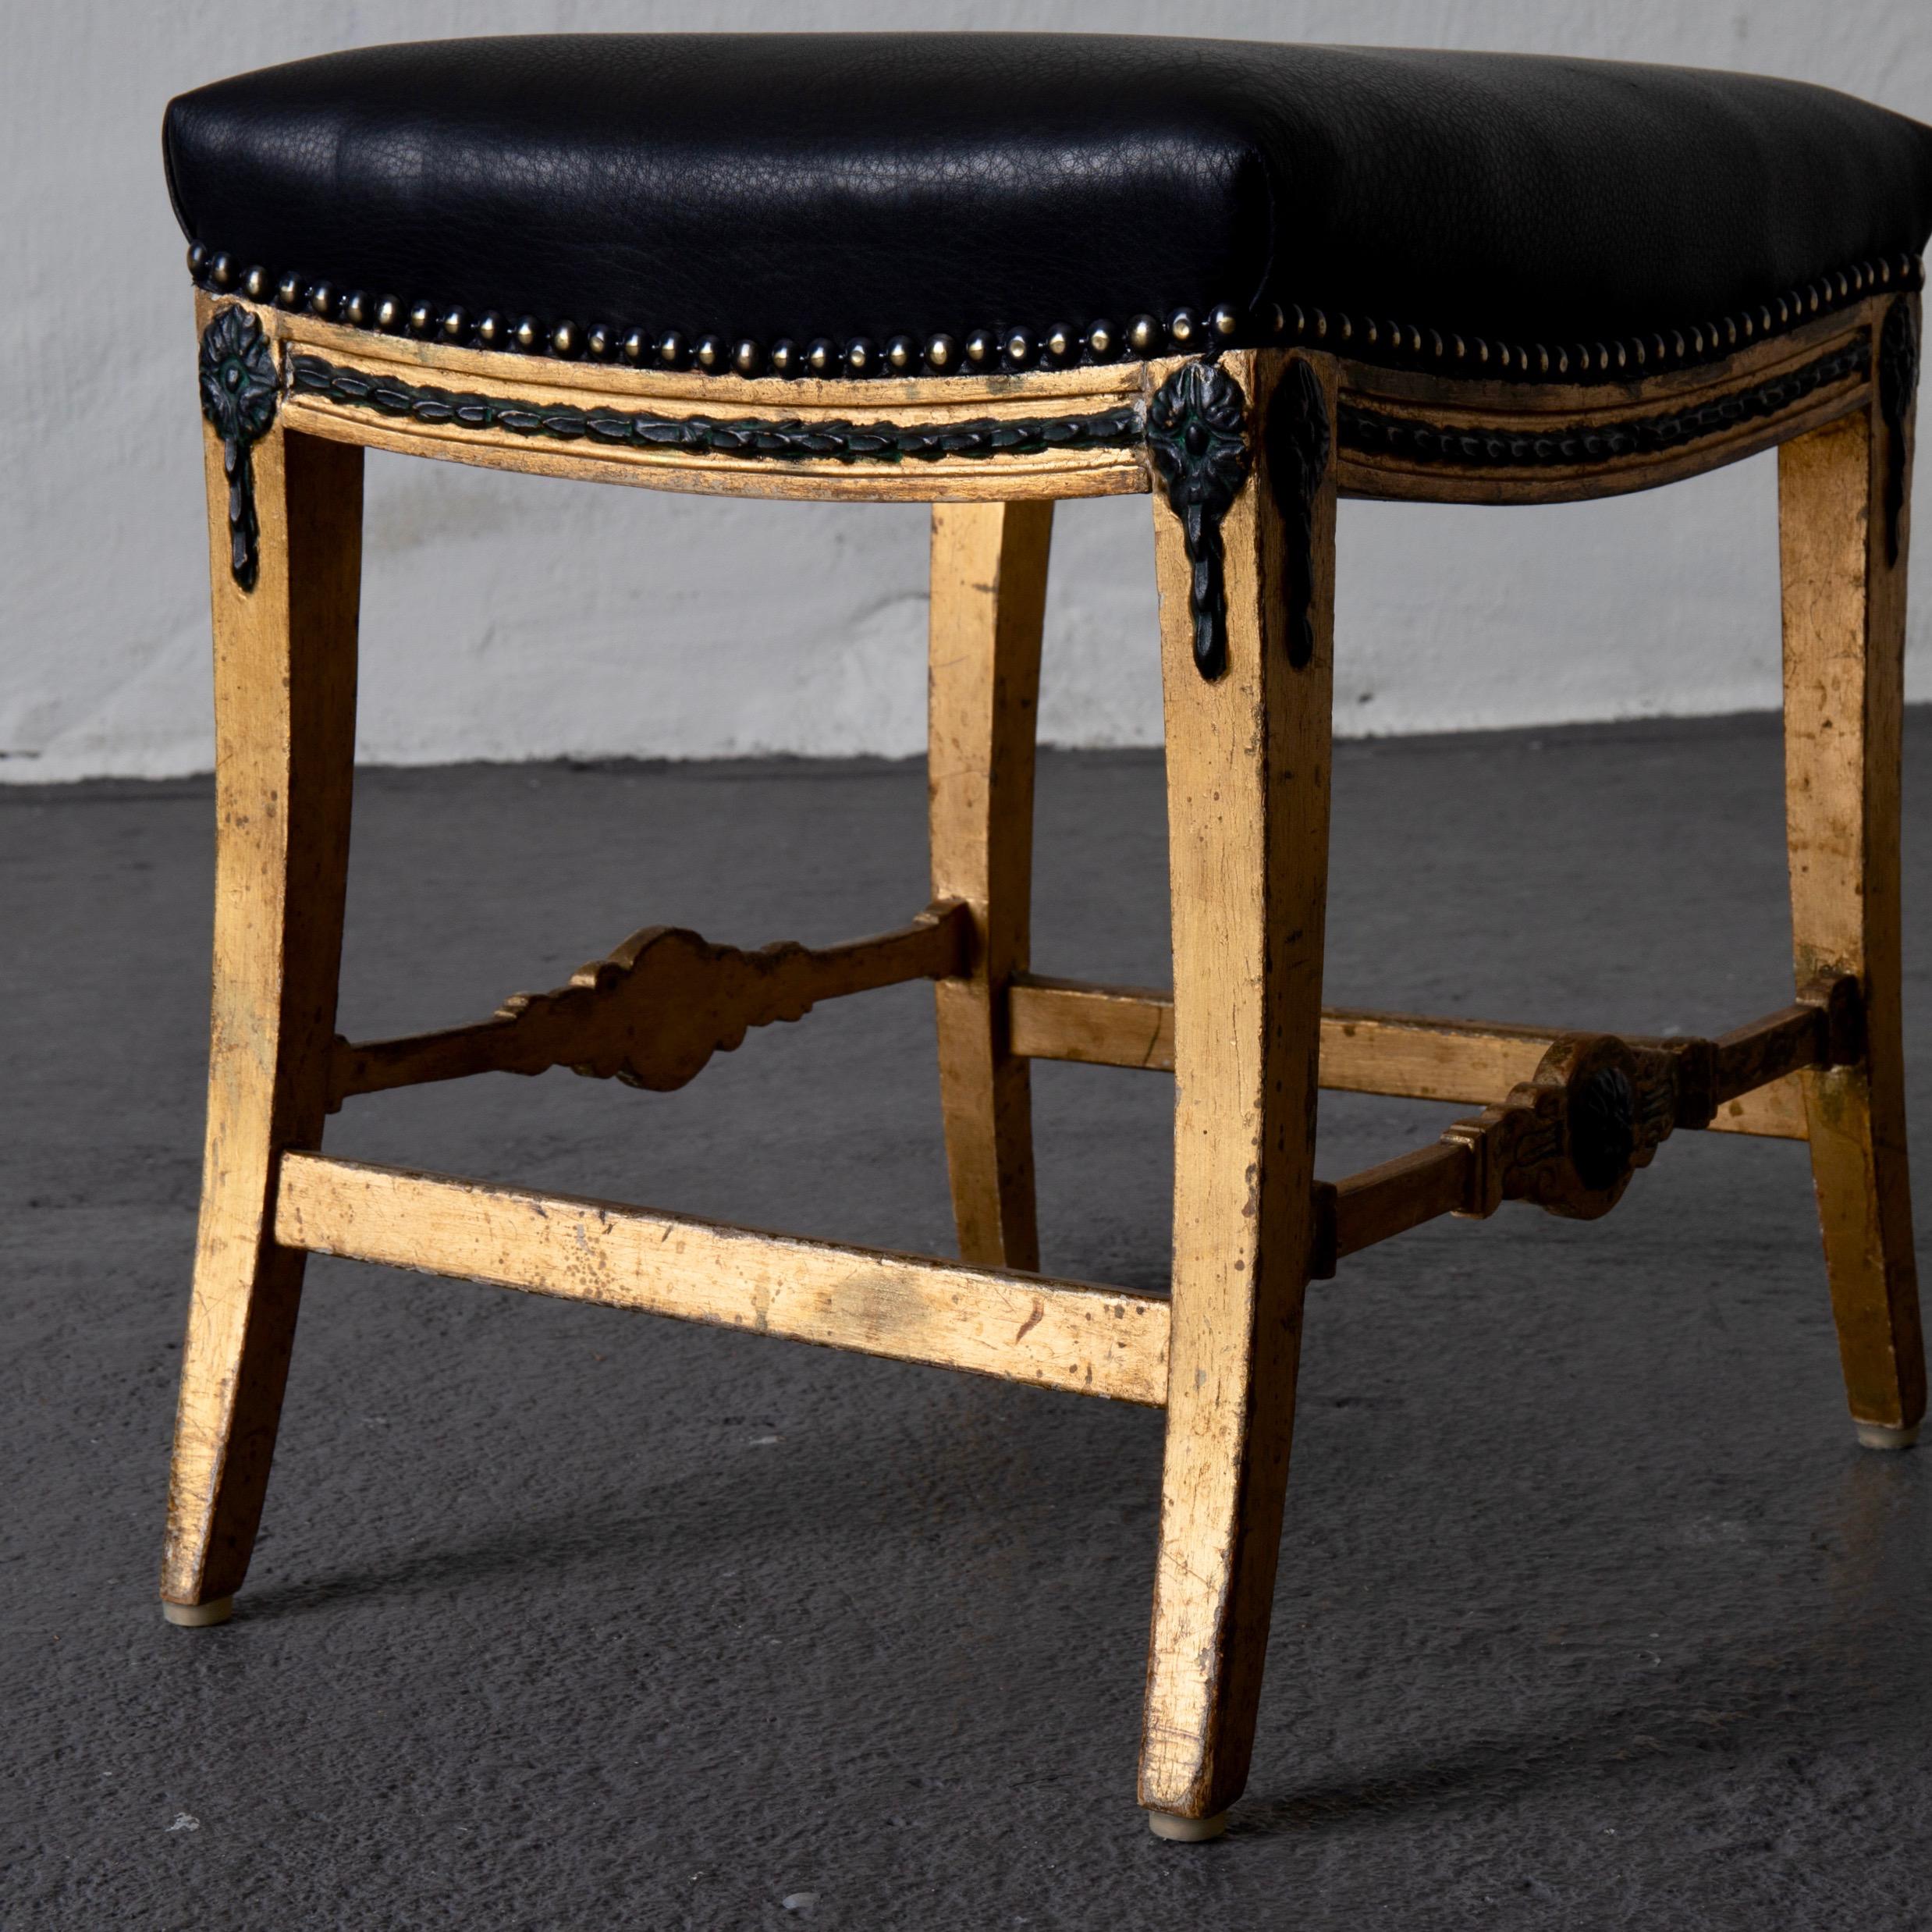 Stool Bench Swedish Neoclassical 18th Century Gilded Black Leather Sweden 4